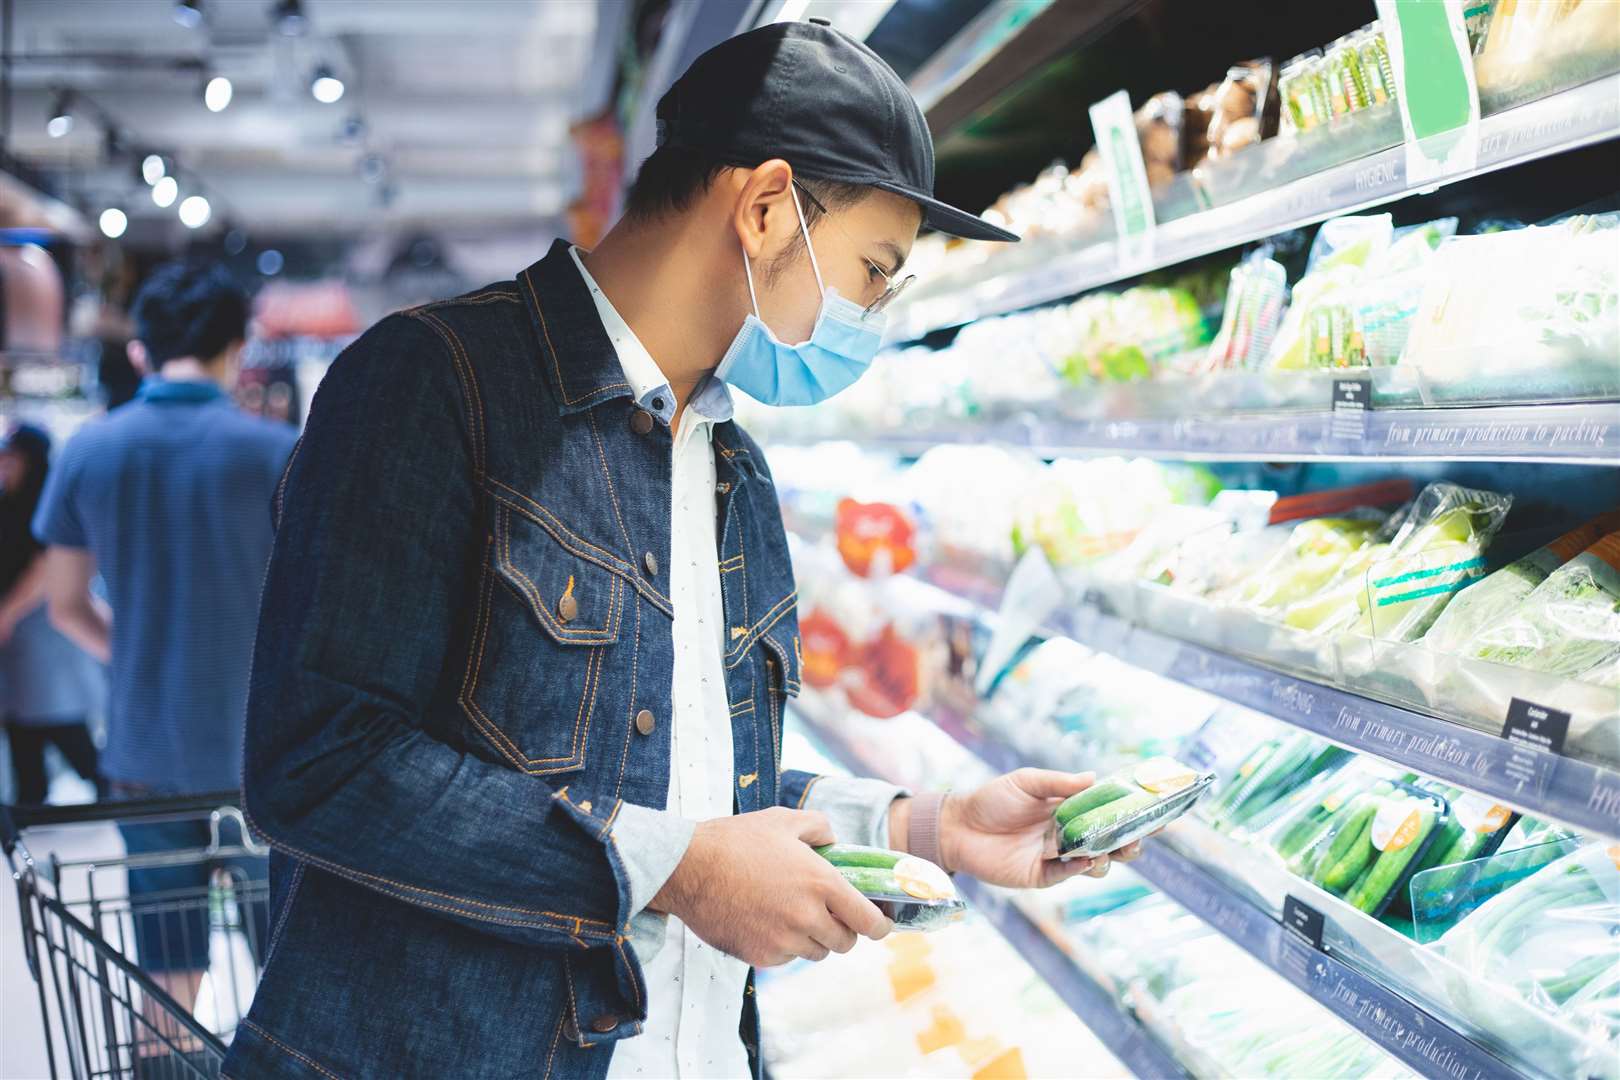 Shoppers with any of the foods at risk are being told not to eat them and return them. Image: Stock photo.